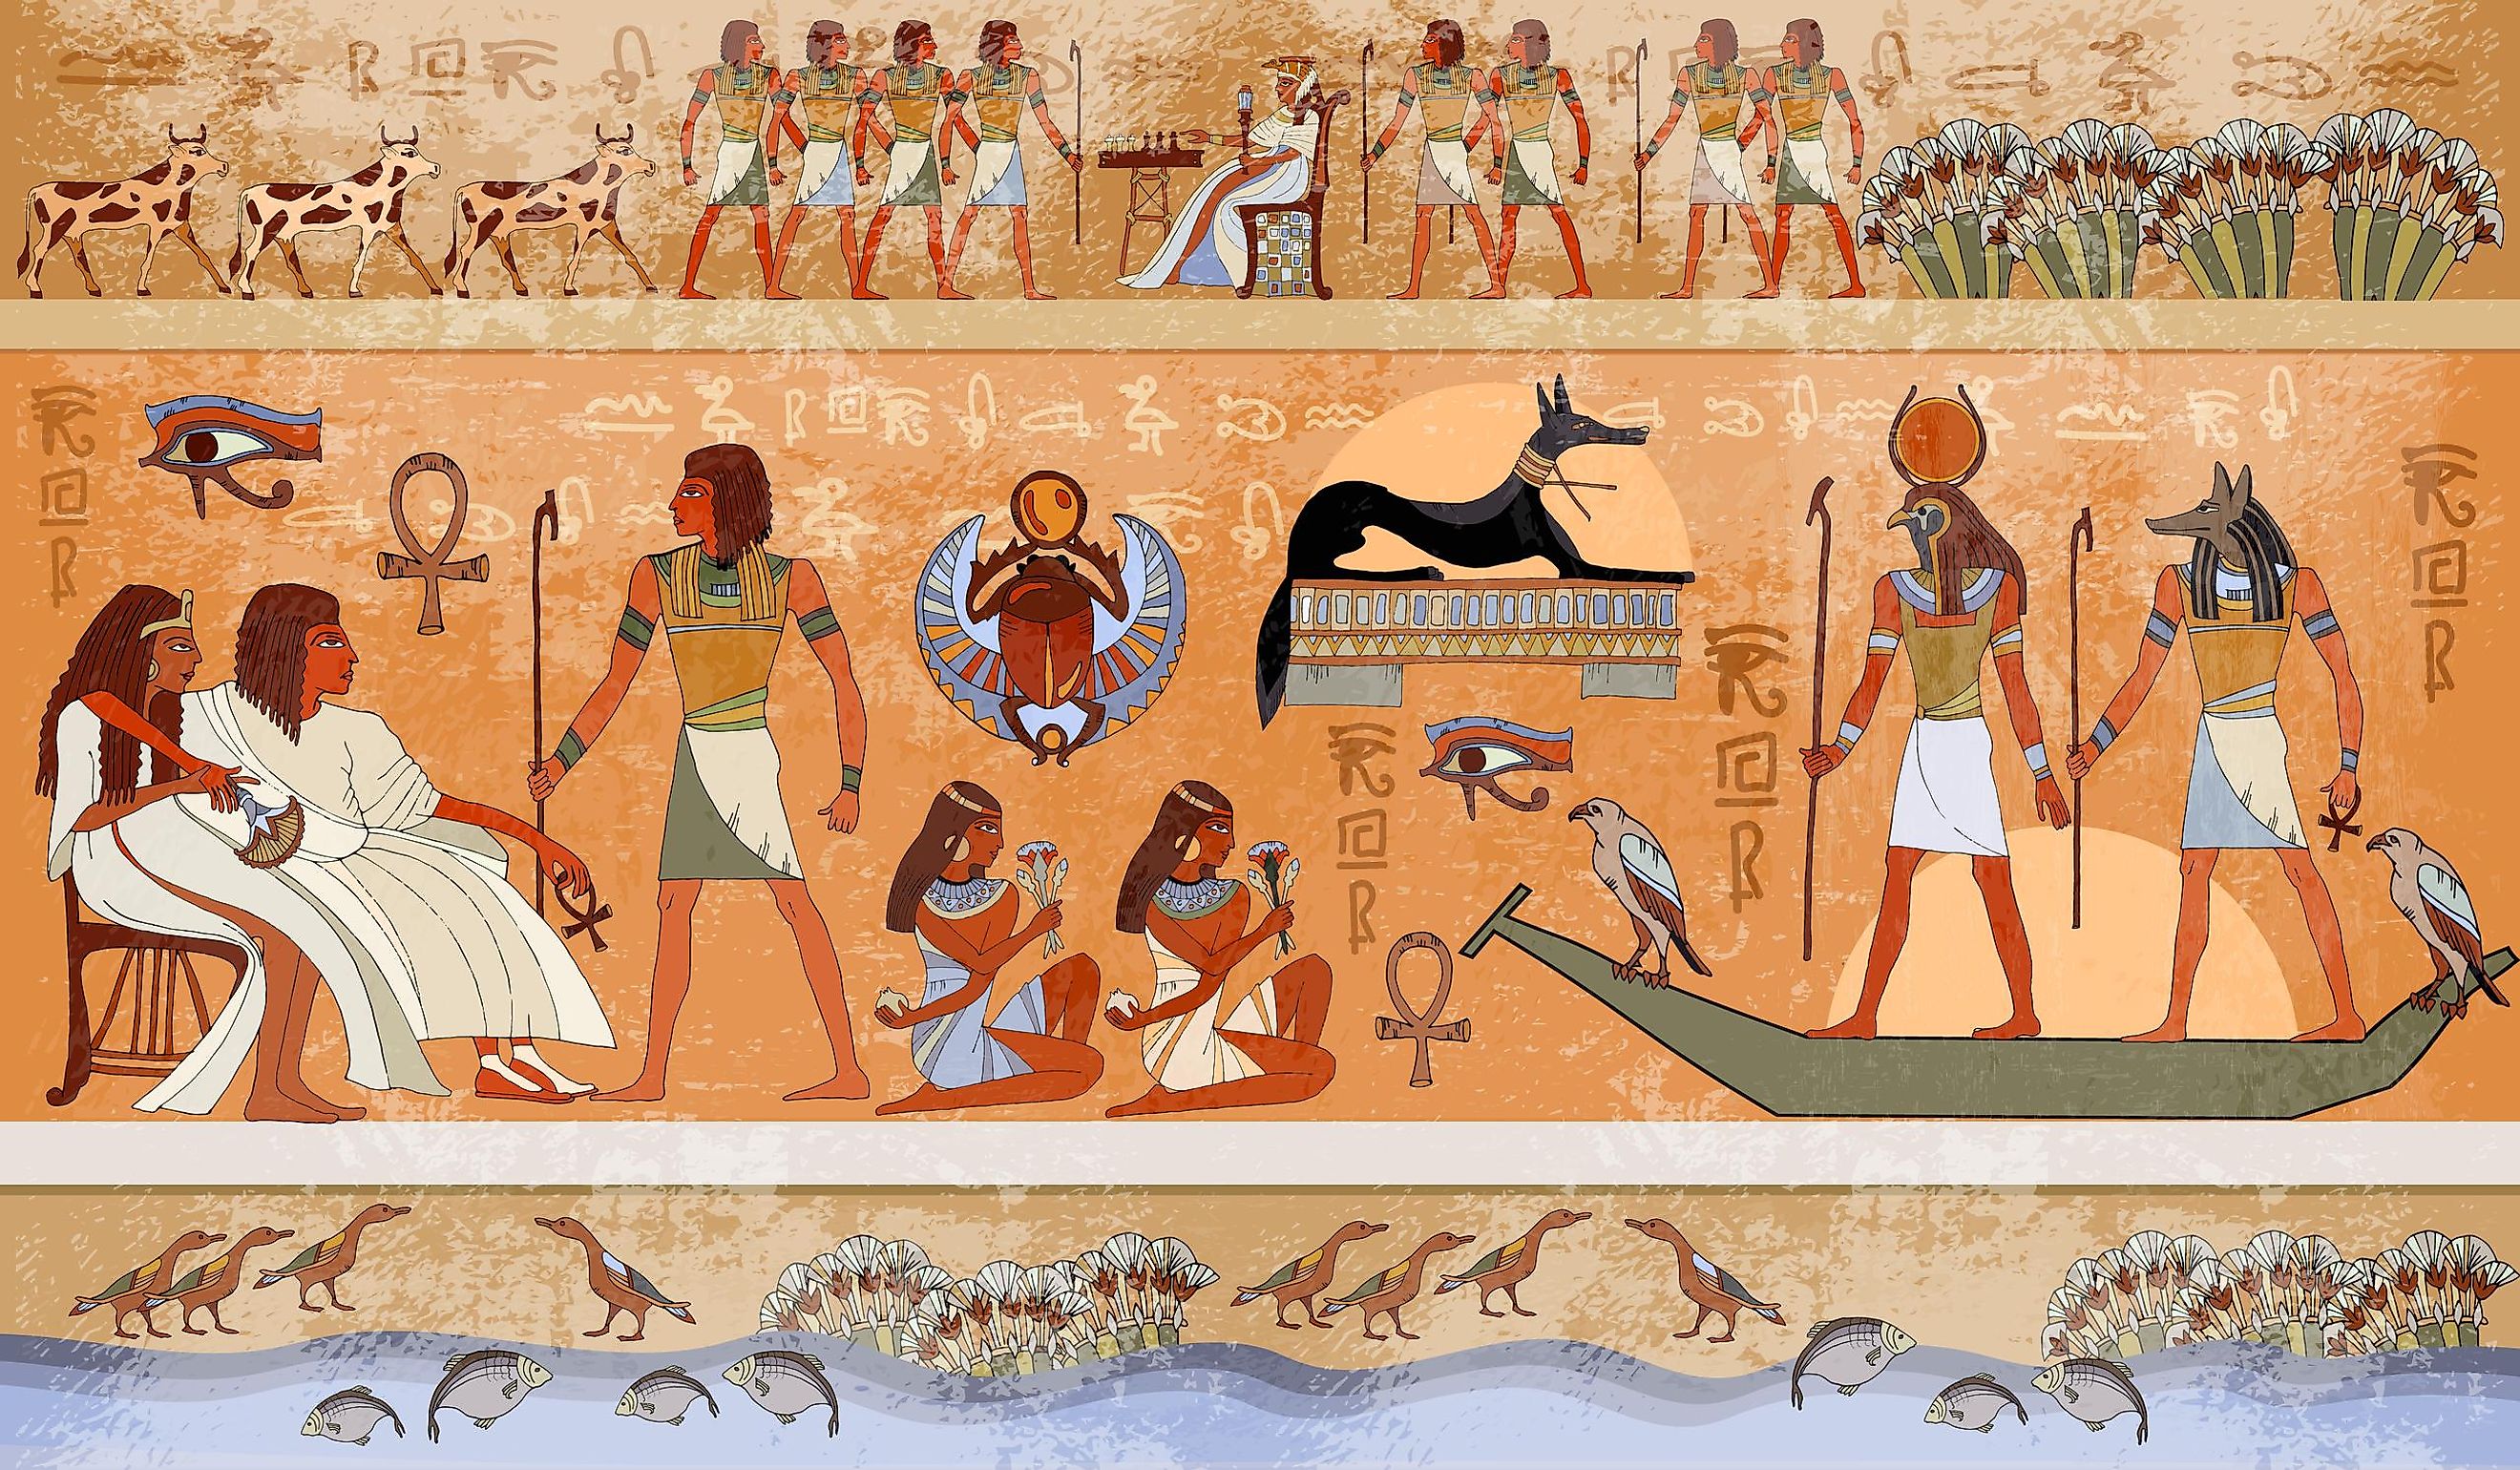 Life In Ancient Egypt